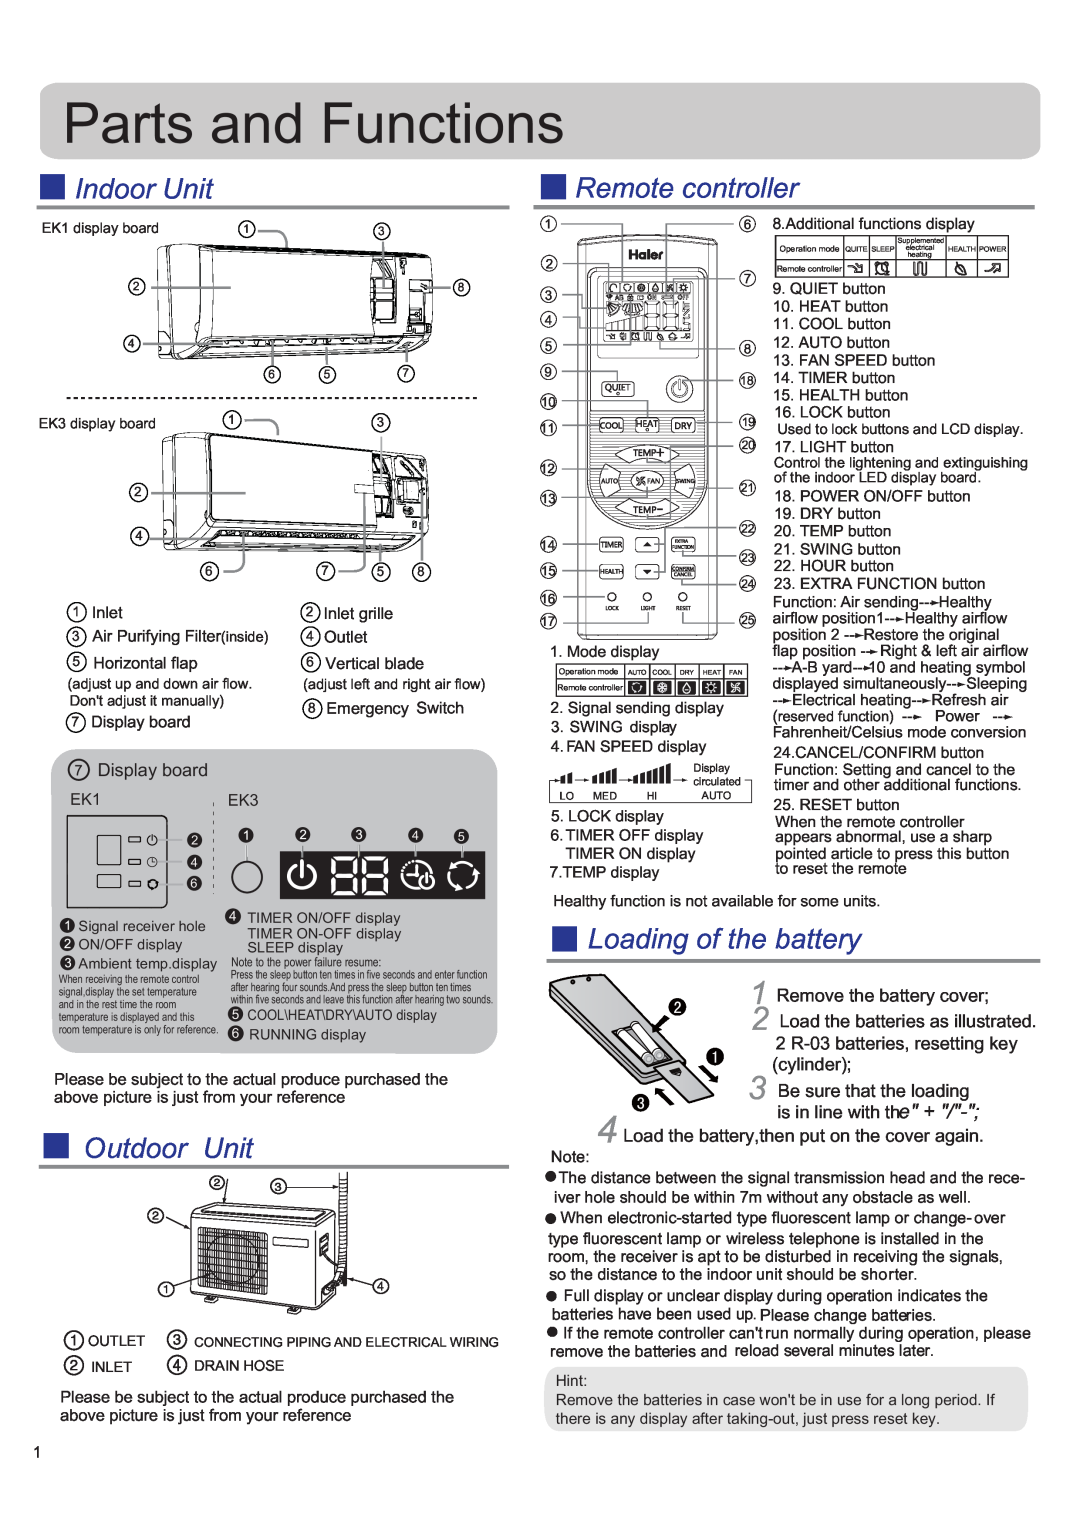 Haier HSU-12HEK03/R2(DB) Indoor Unit, Outdoor Unit, Remote controller, Loading of the battery, Parts and Functions 